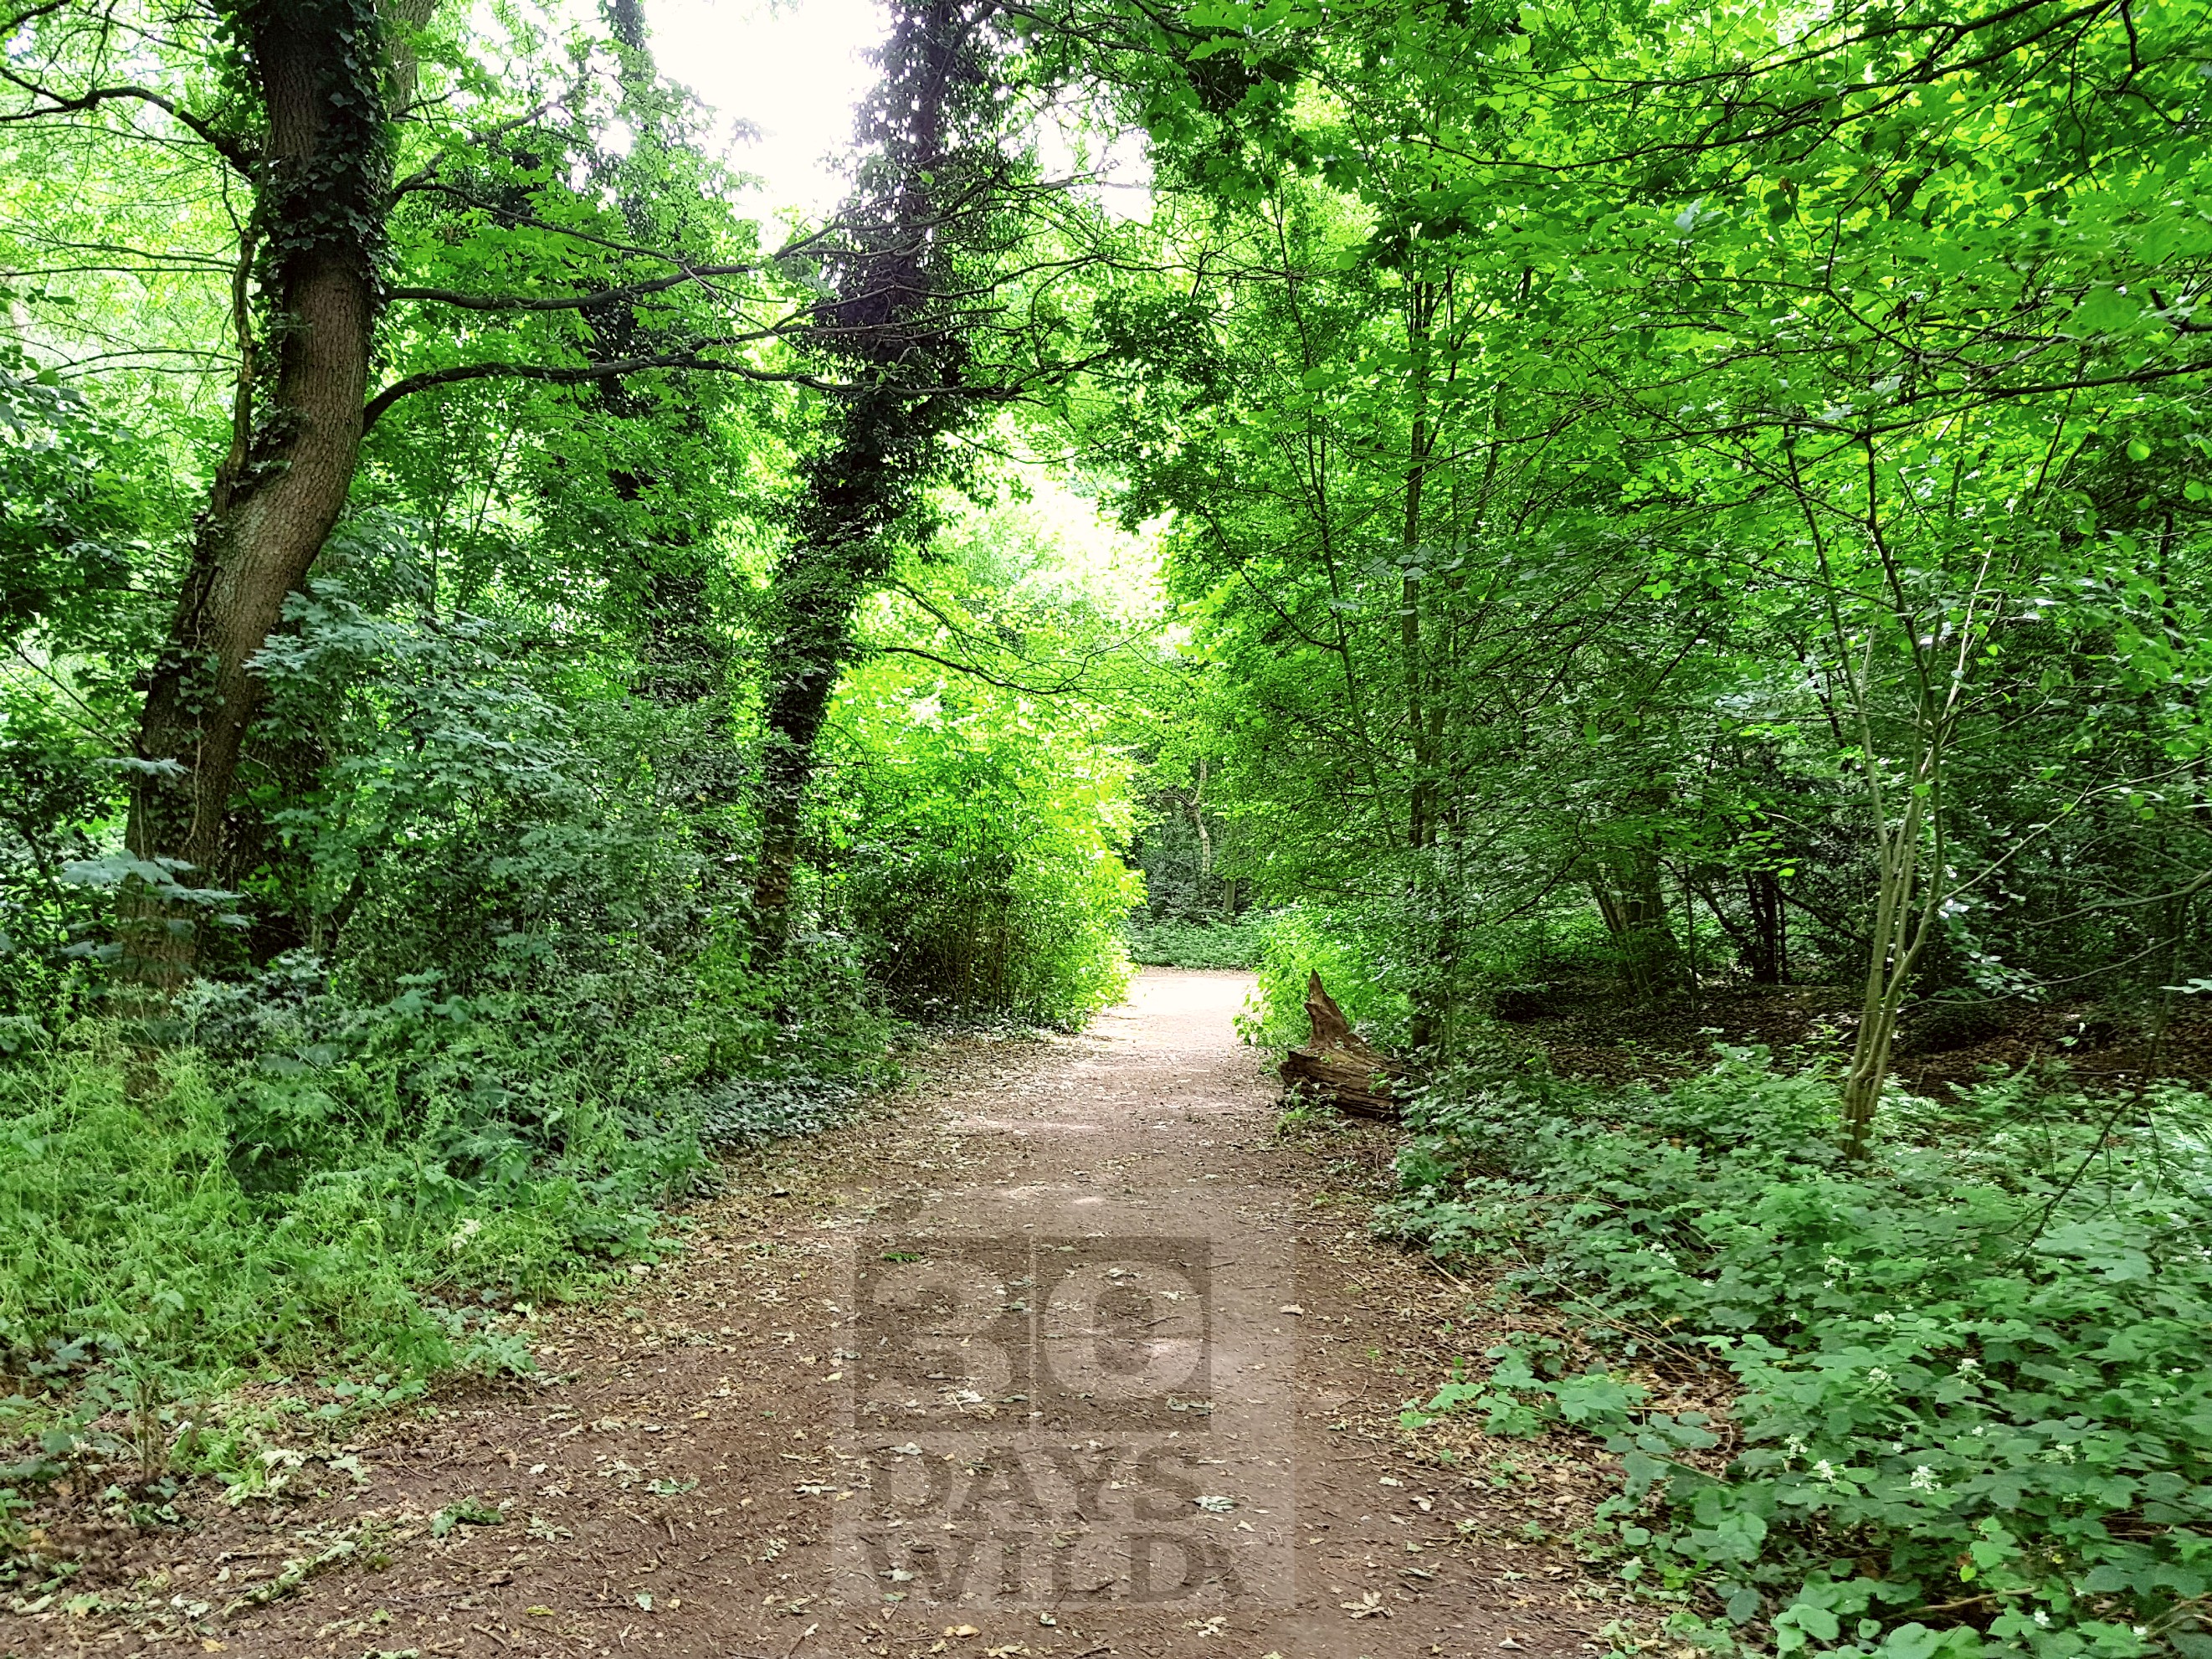 30 days wild, #30dayswild, #livinglifewild, The Wildlife Trusts, stay wild, nature, wildlife, natural environment, childhood unplugged, get outside, outdoors